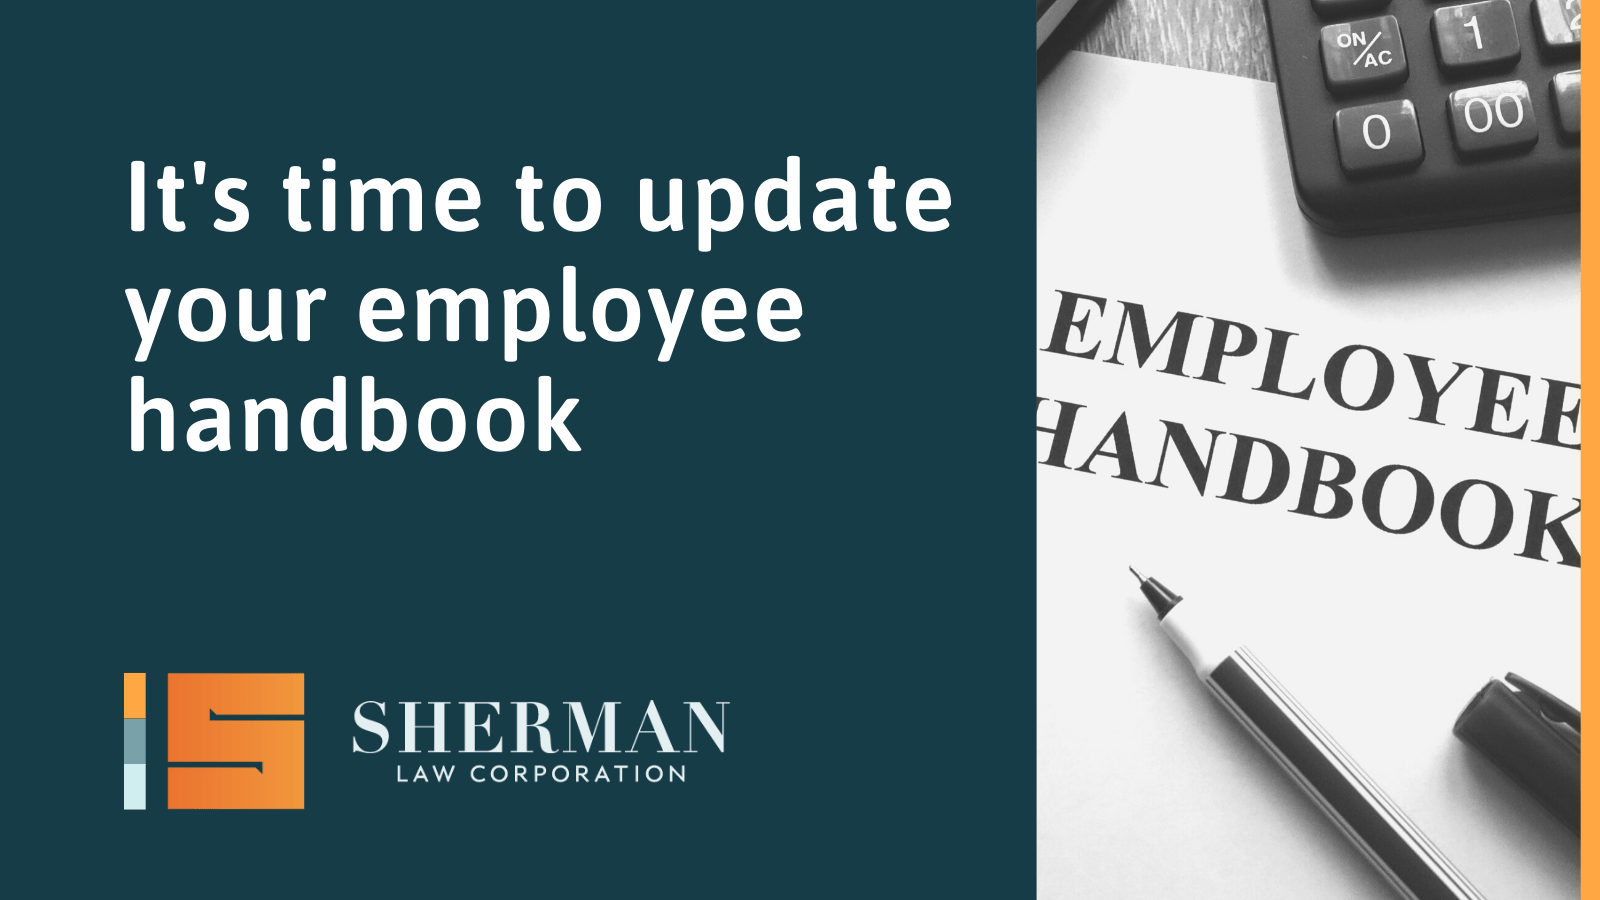 It's time to update your california employee handbook - sherman law corporation